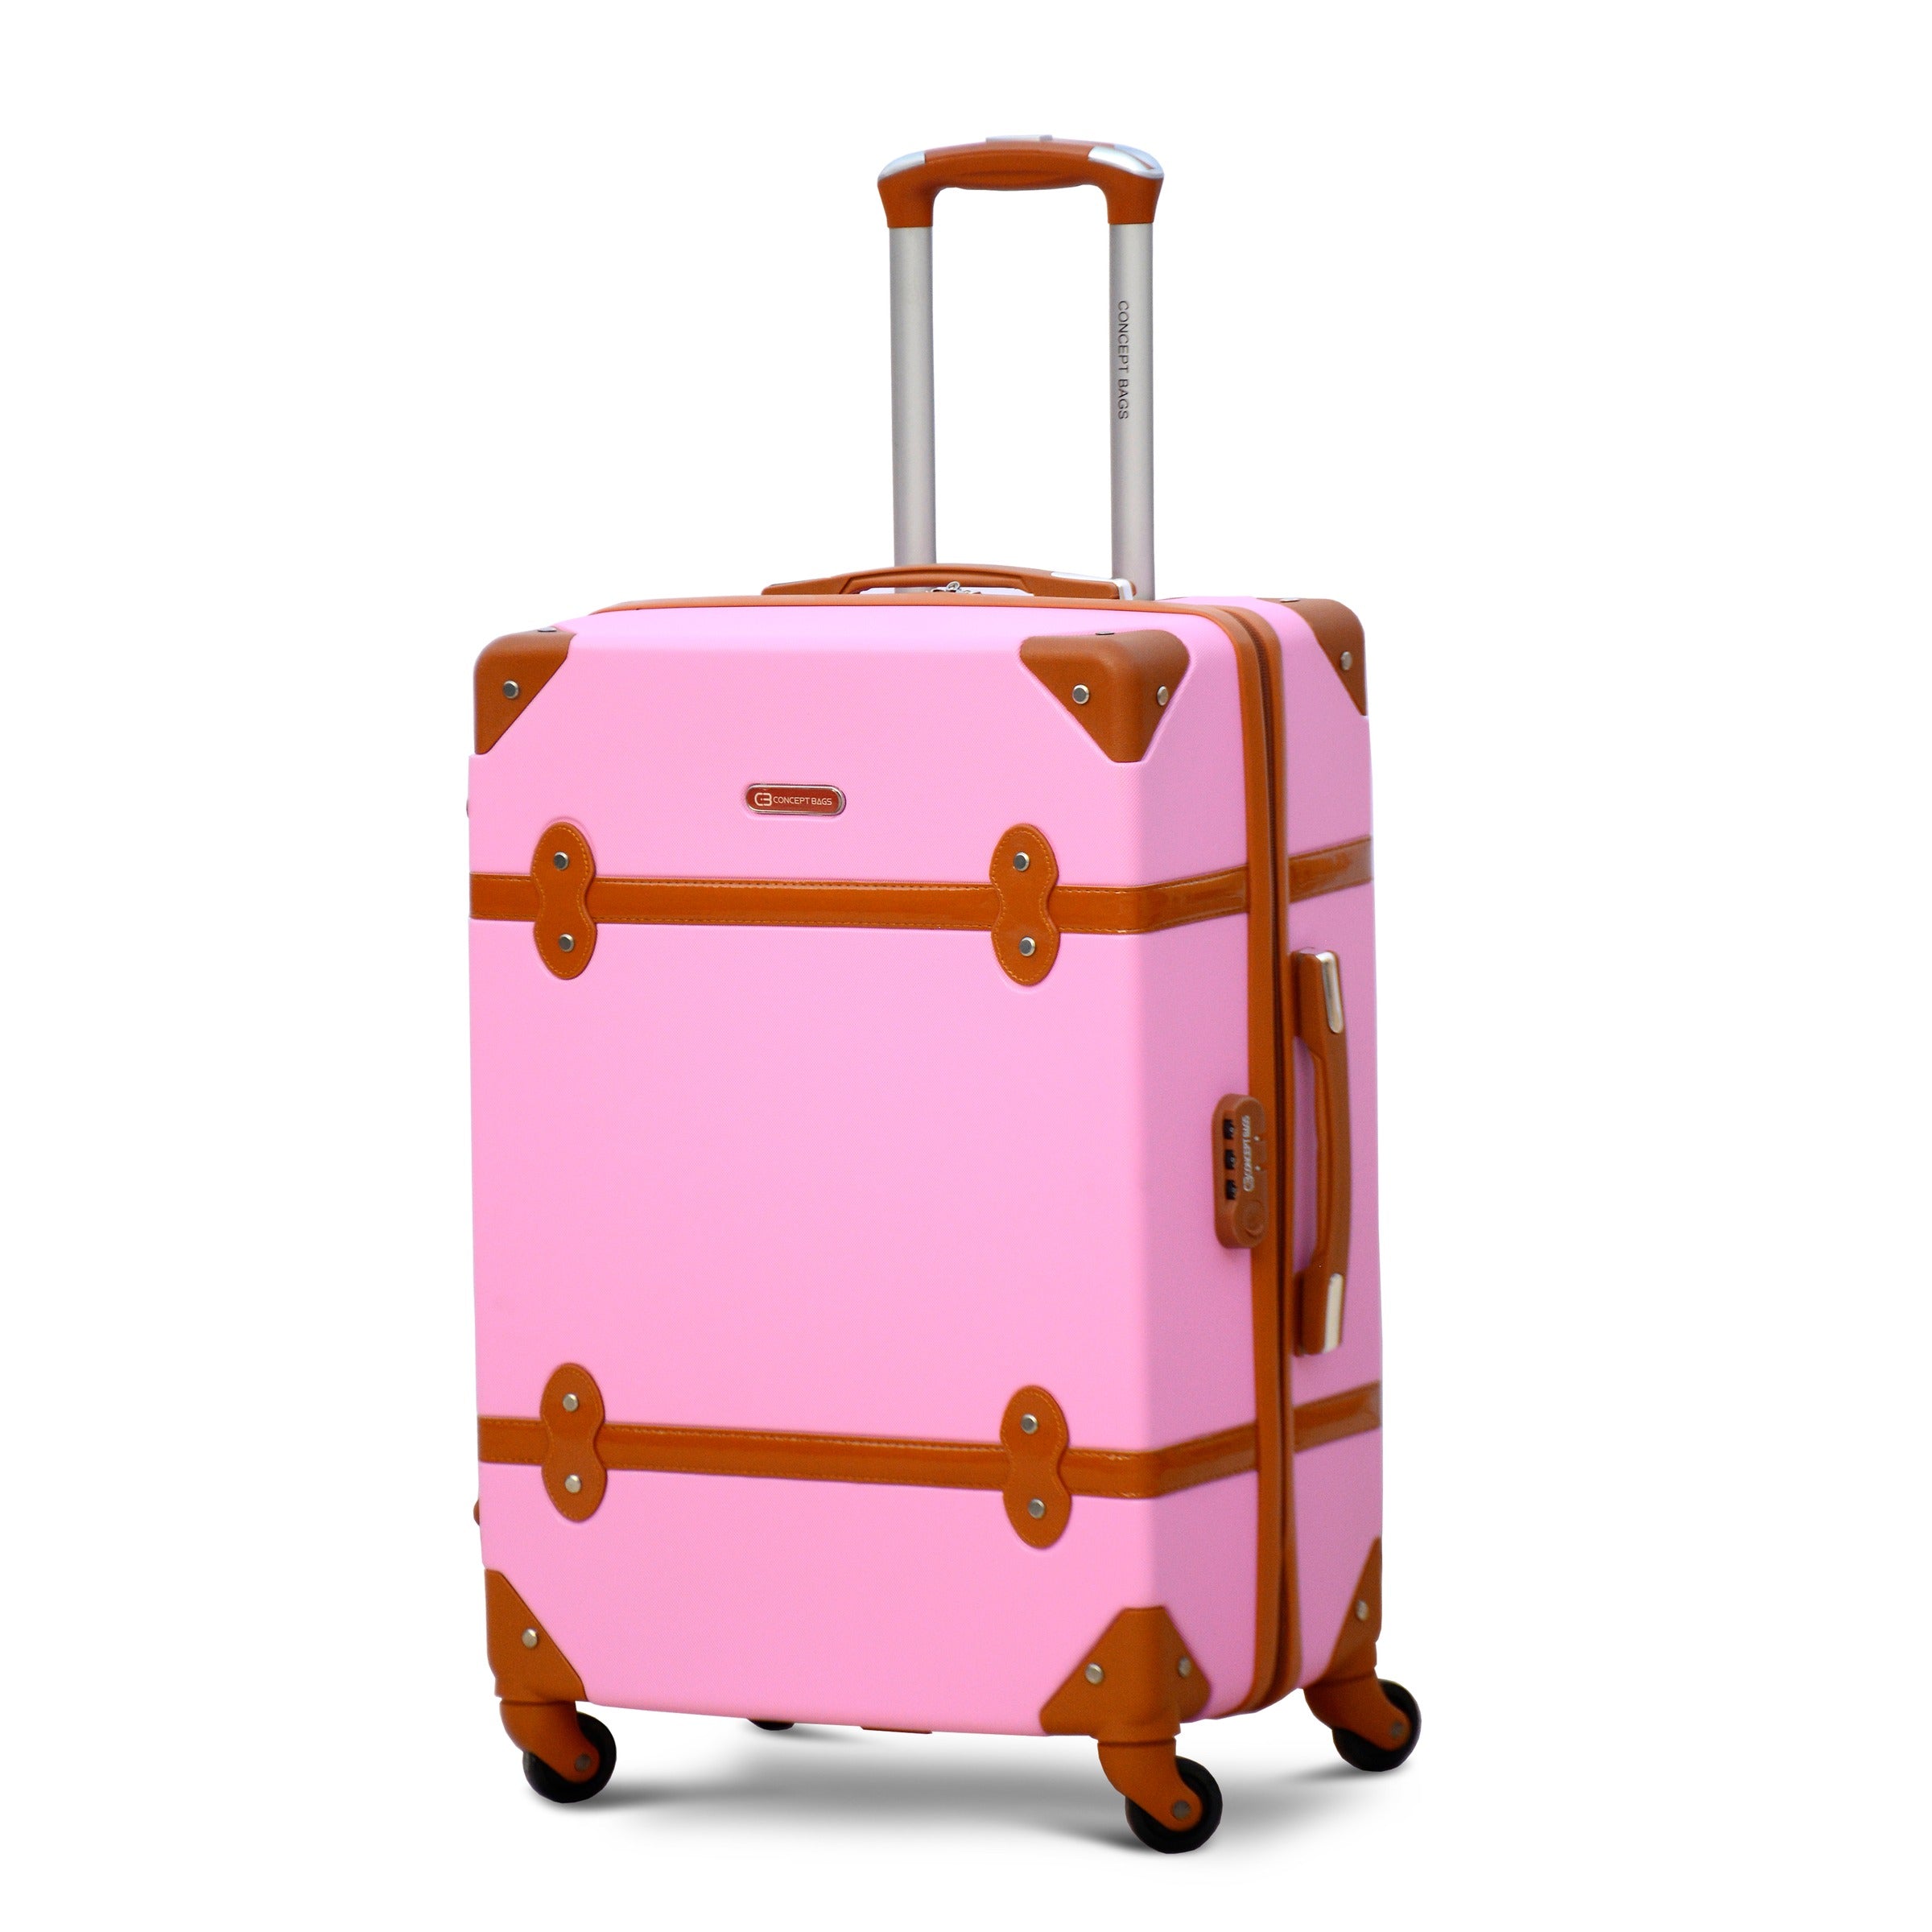 24" Corner Guard Lightweight ABS Luggage Pink and Brown Colour Hard Case Trolley Bag